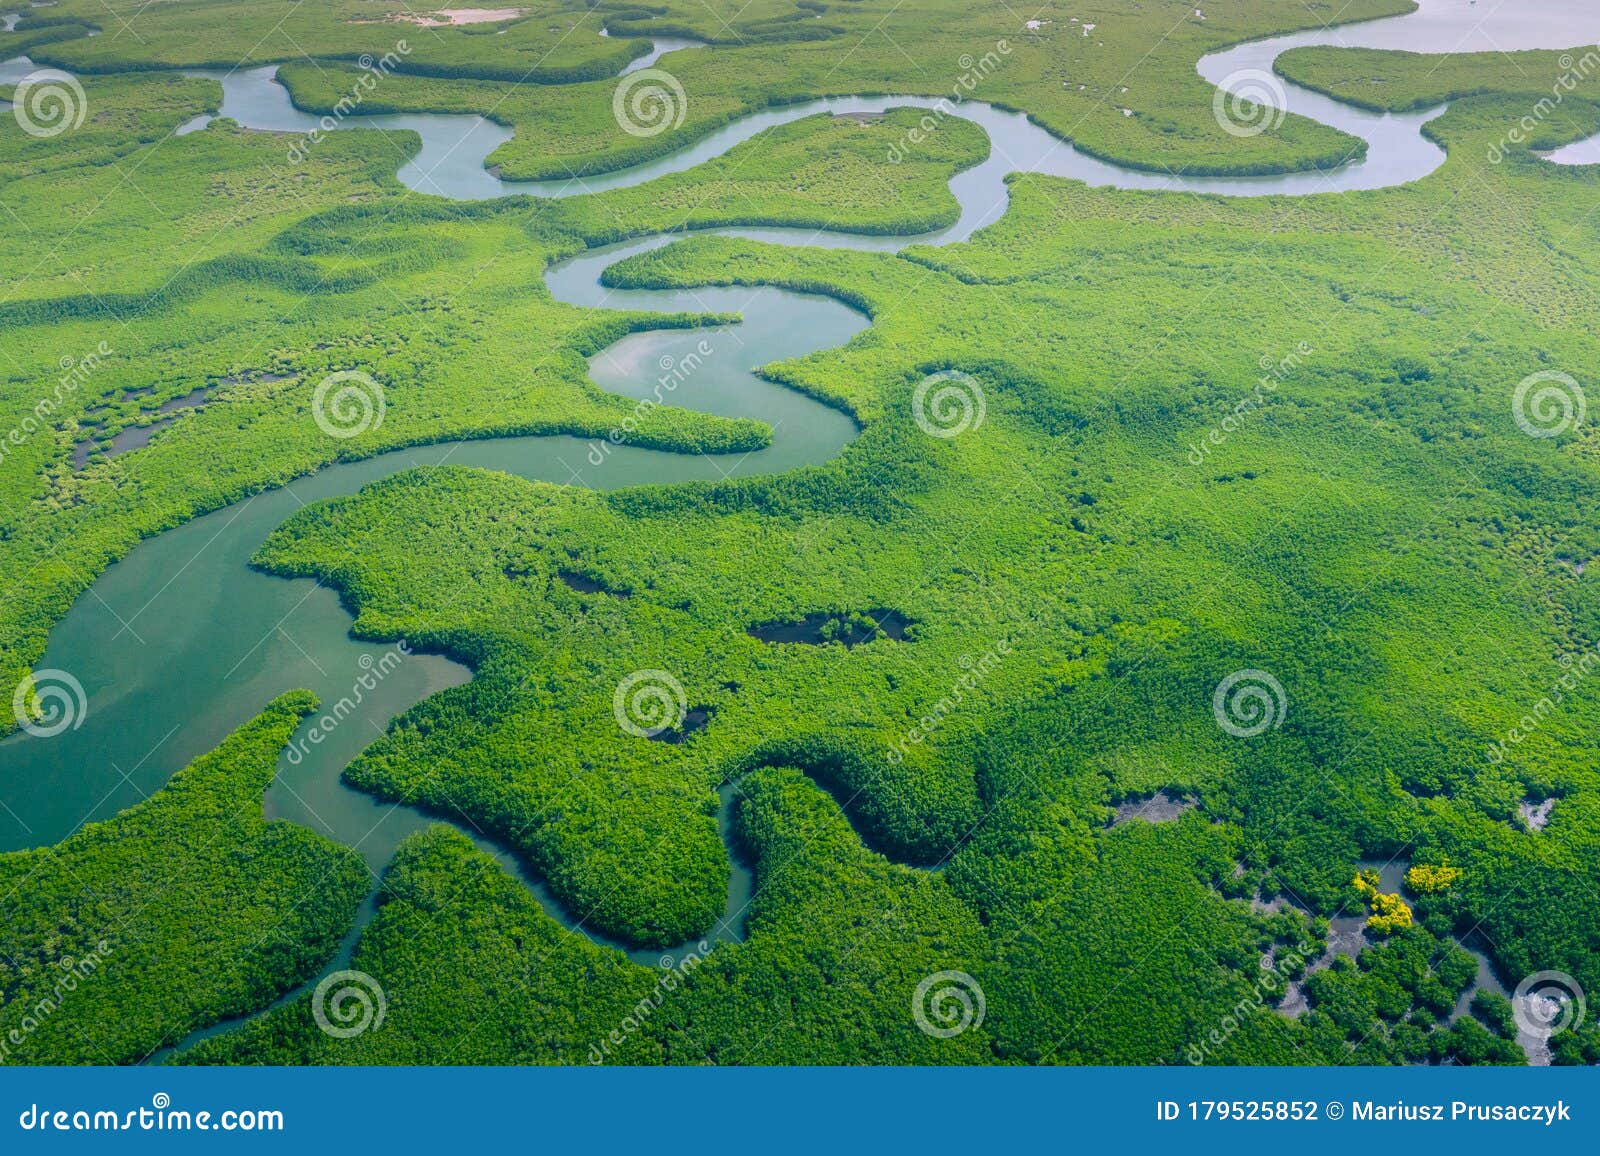 aerial view of amazon rainforest in brazil, south america. green forest. bird`s-eye view